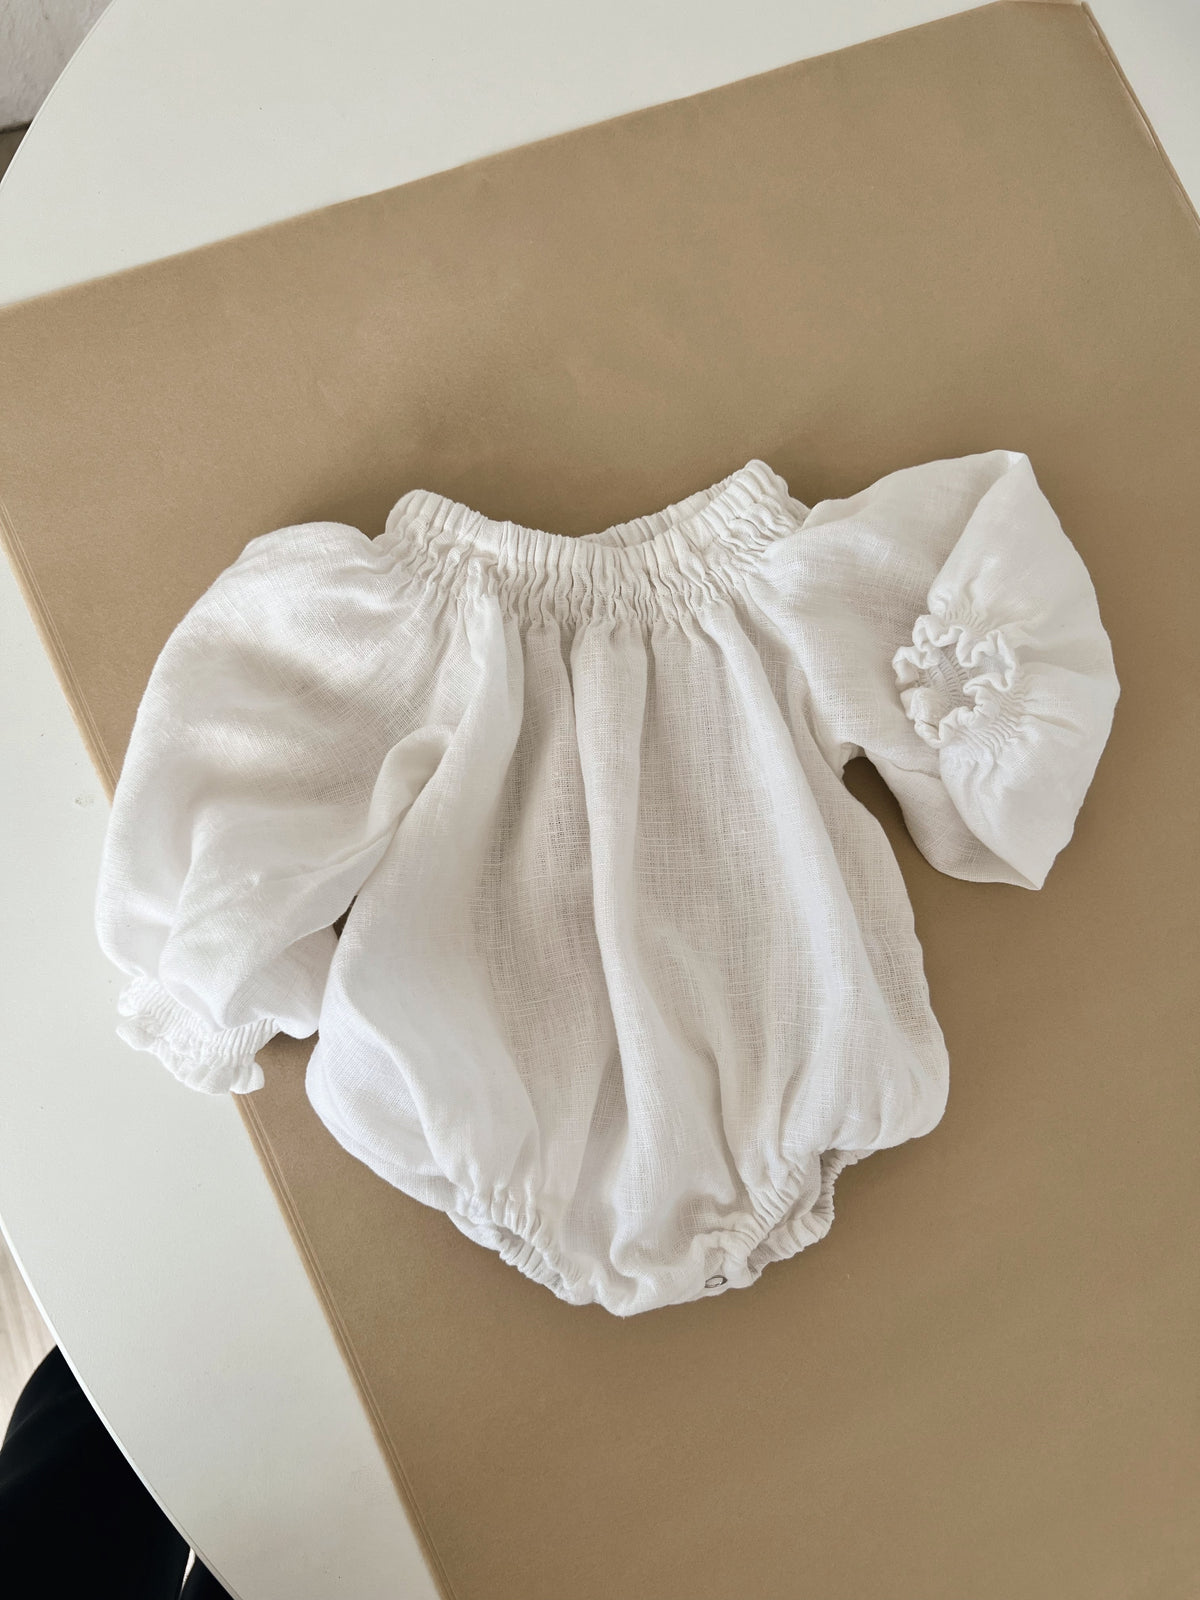 Baby linen white Marlow and Mae Mira romper on wrapping paper